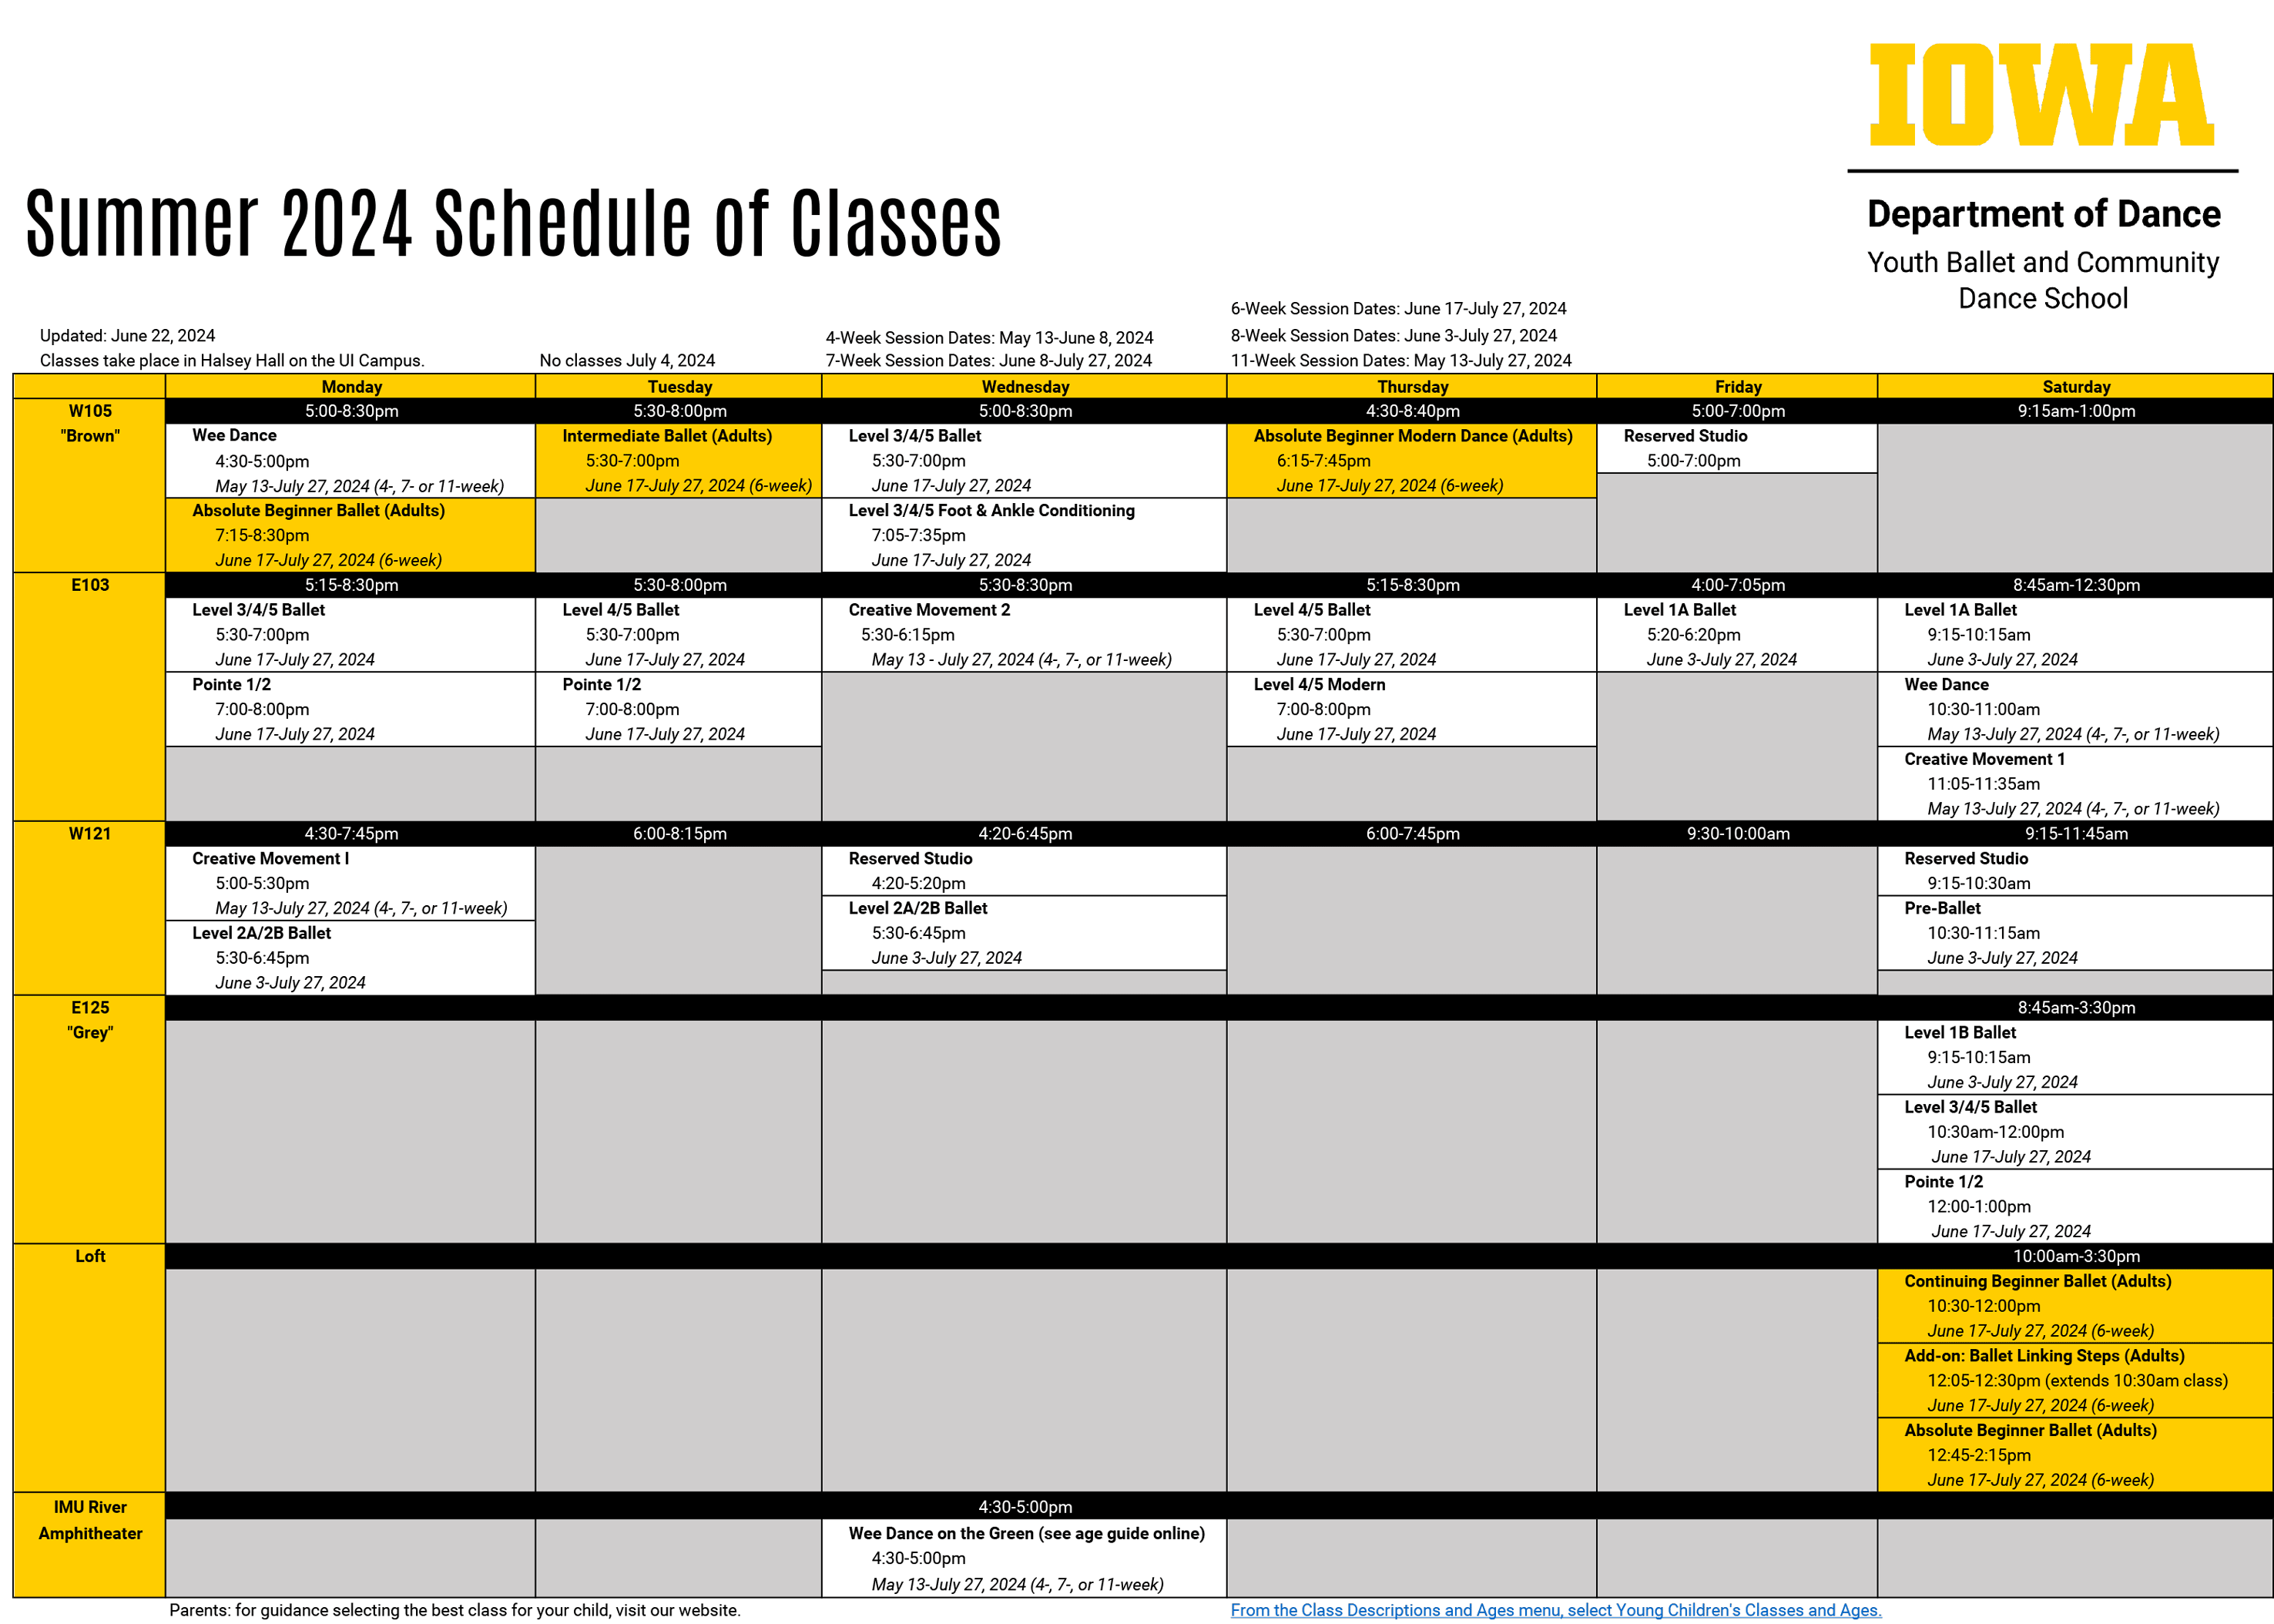 Image of class schedule